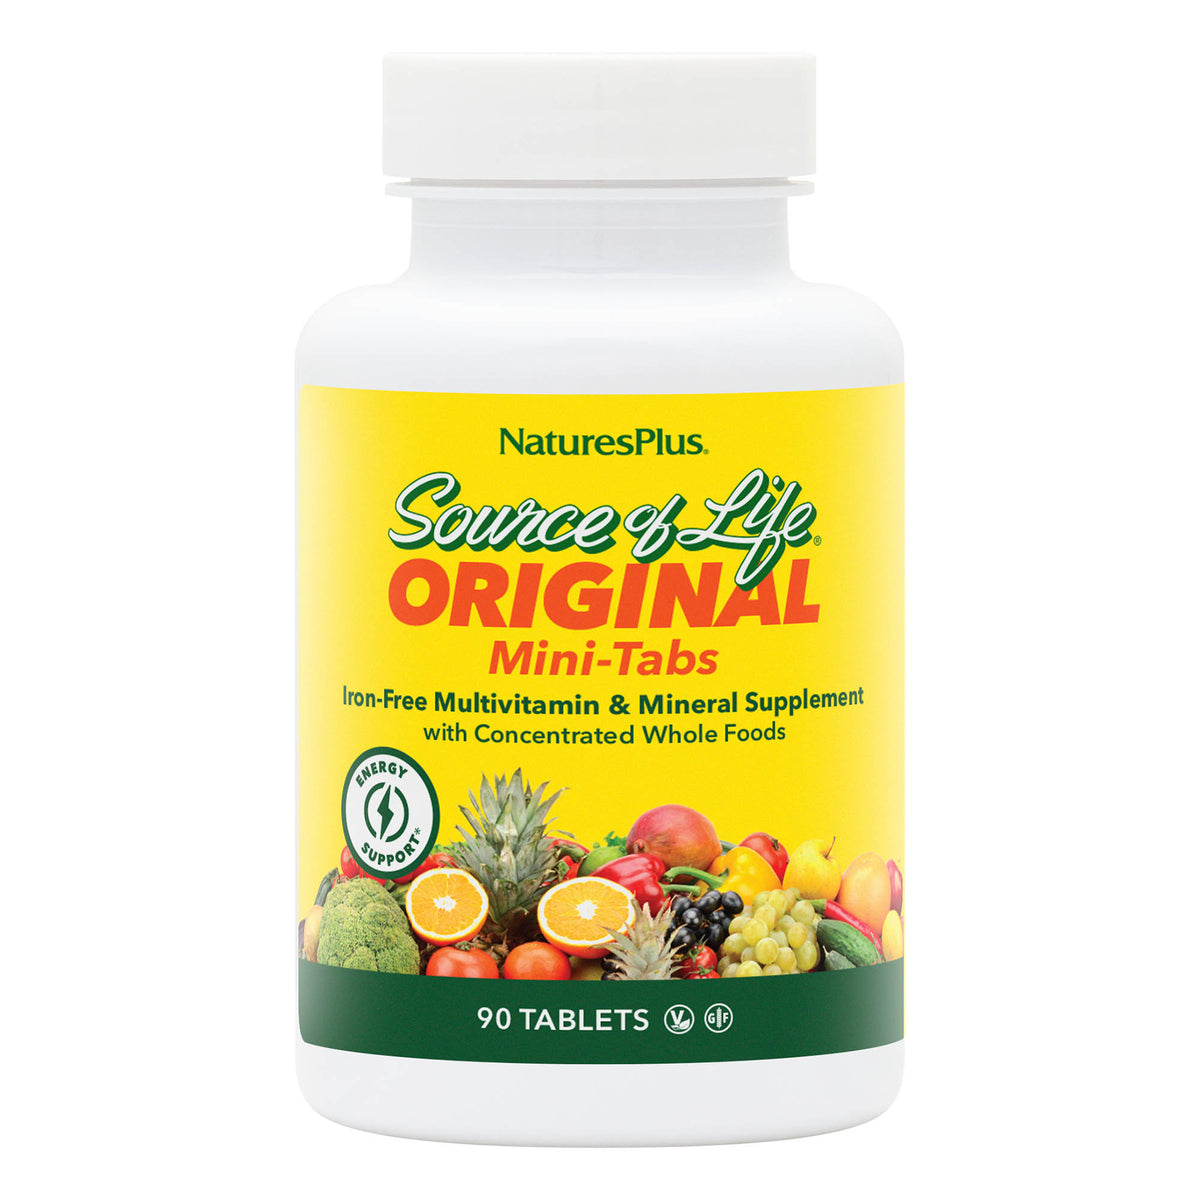 product image of Source of Life® Multivitamin No-Iron Mini-Tabs containing 90 Count